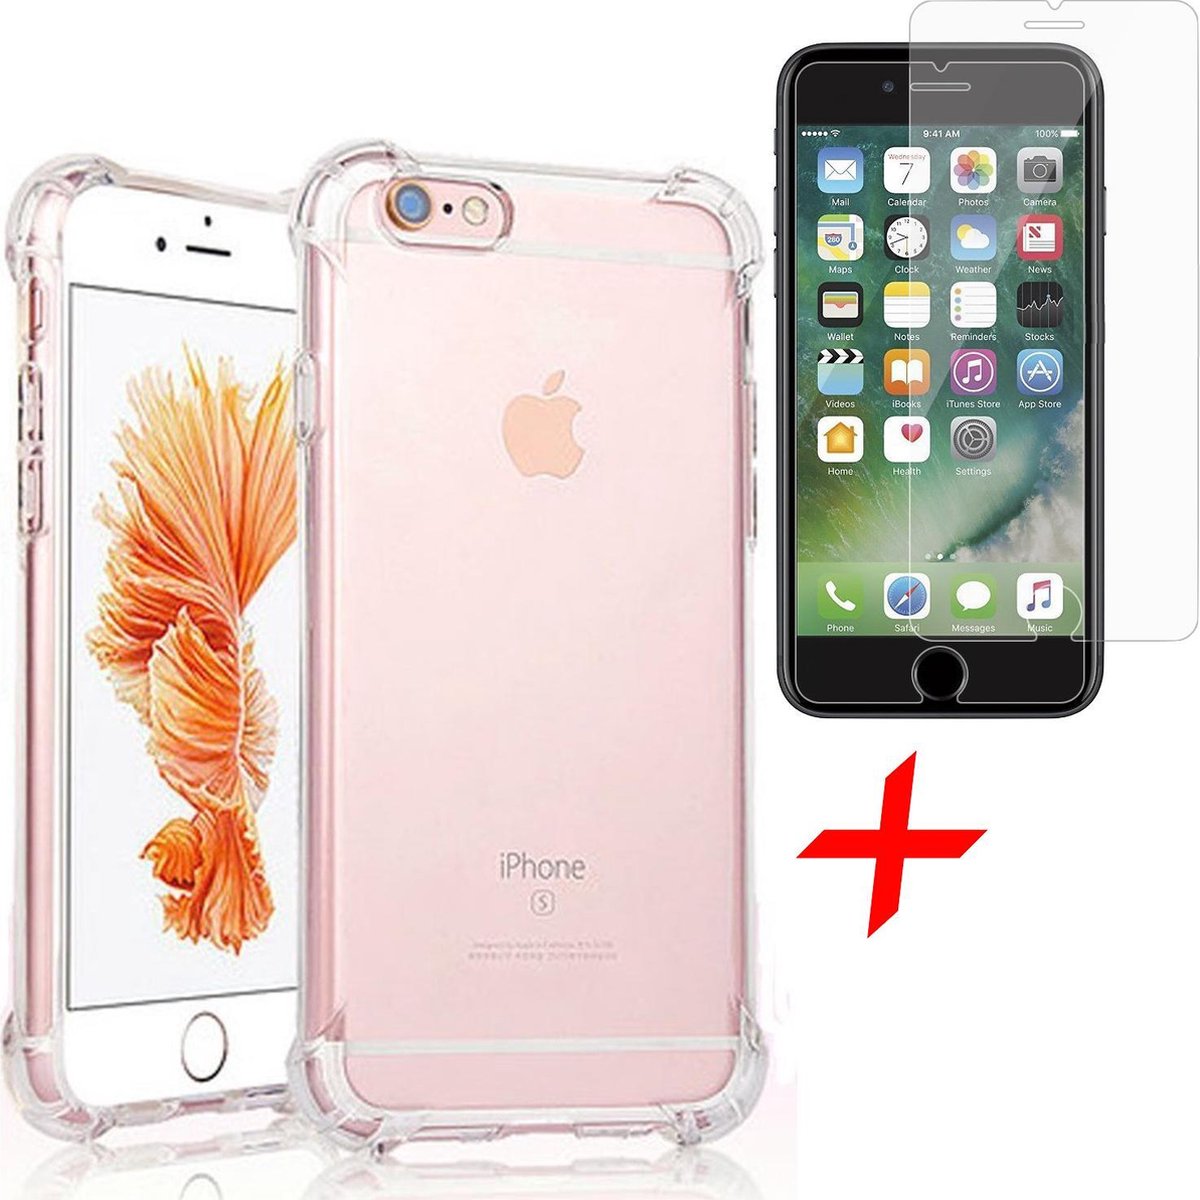 Picknicken explosie Emigreren iPhone 6s Plus / 6 Plus Hoesje - Anti Shock Proof Siliconen Back Cover Case  Hoes Transparant - Tempered Glass Screenprotector